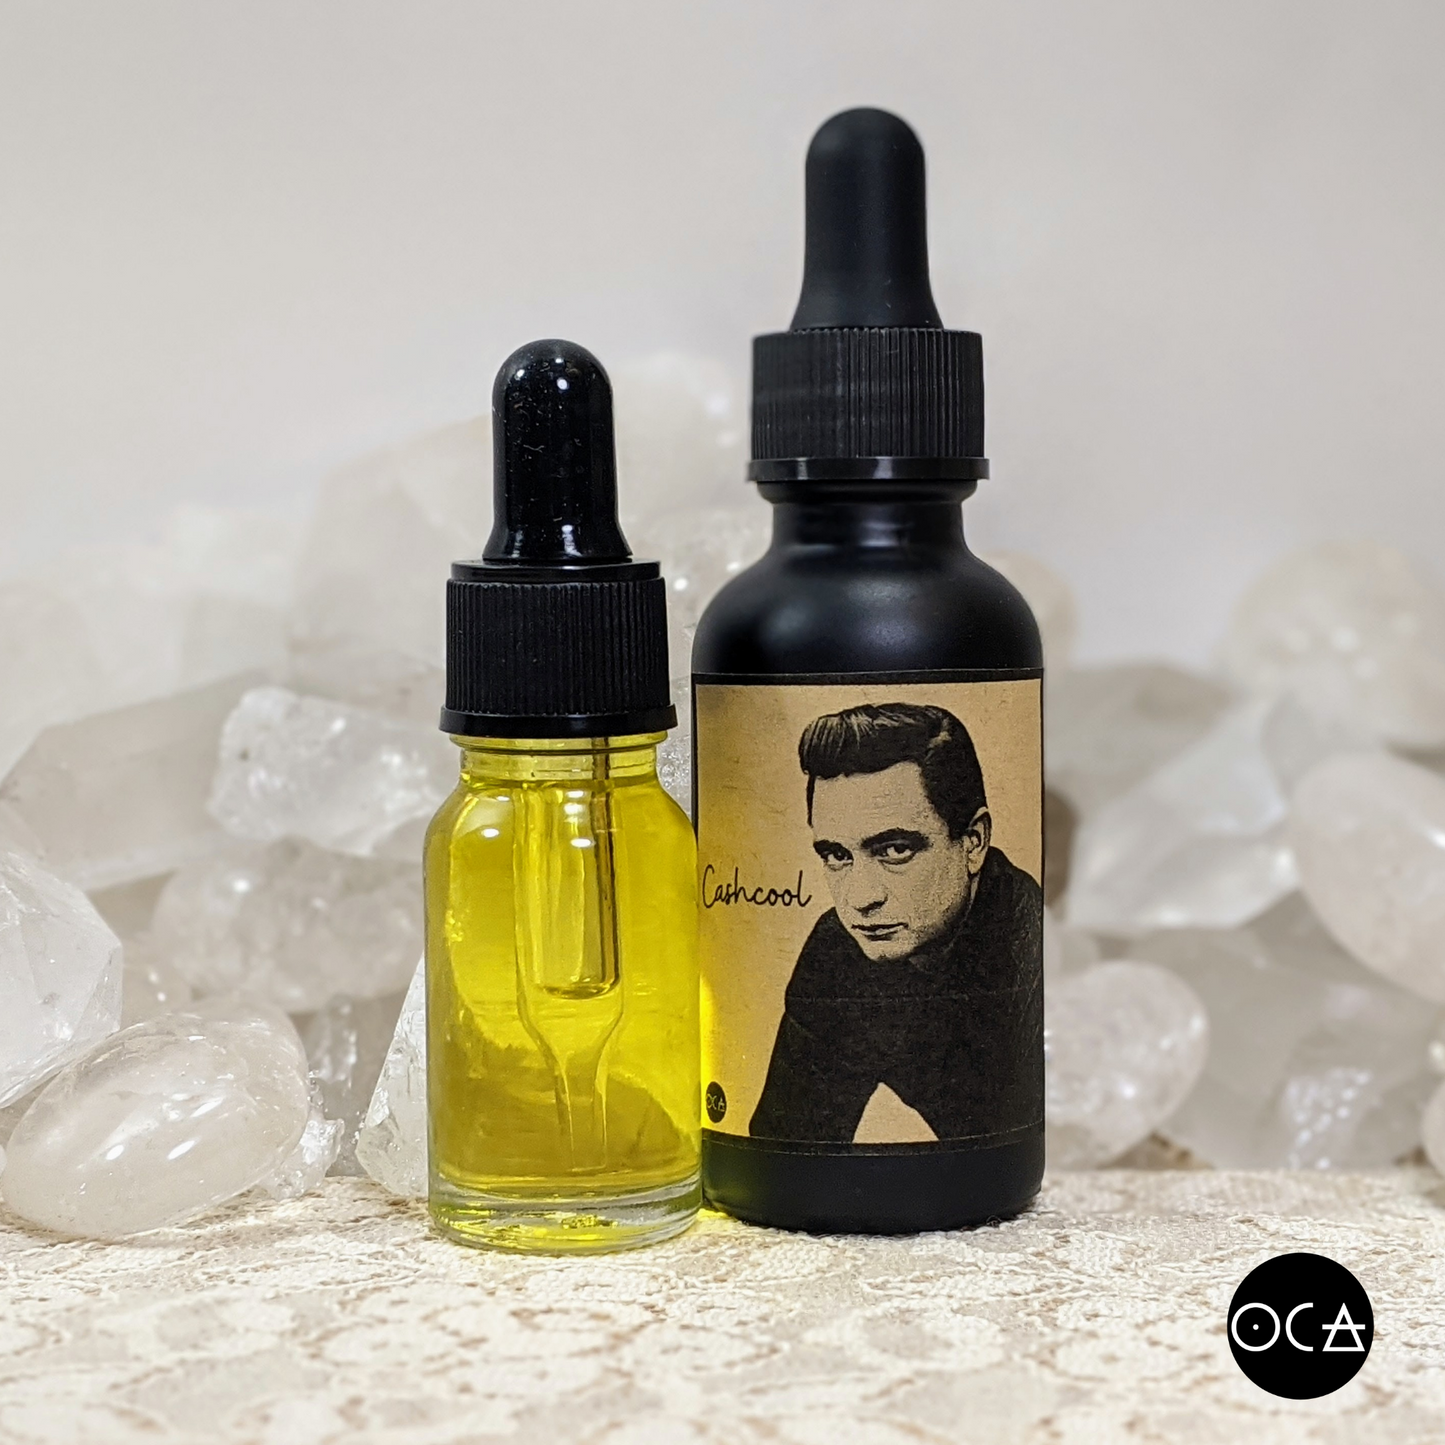 Cash Cool Oil/Perfume/Cologne (Unisexy Blend)| A tribute to Johnny Cash (Songbook Series)